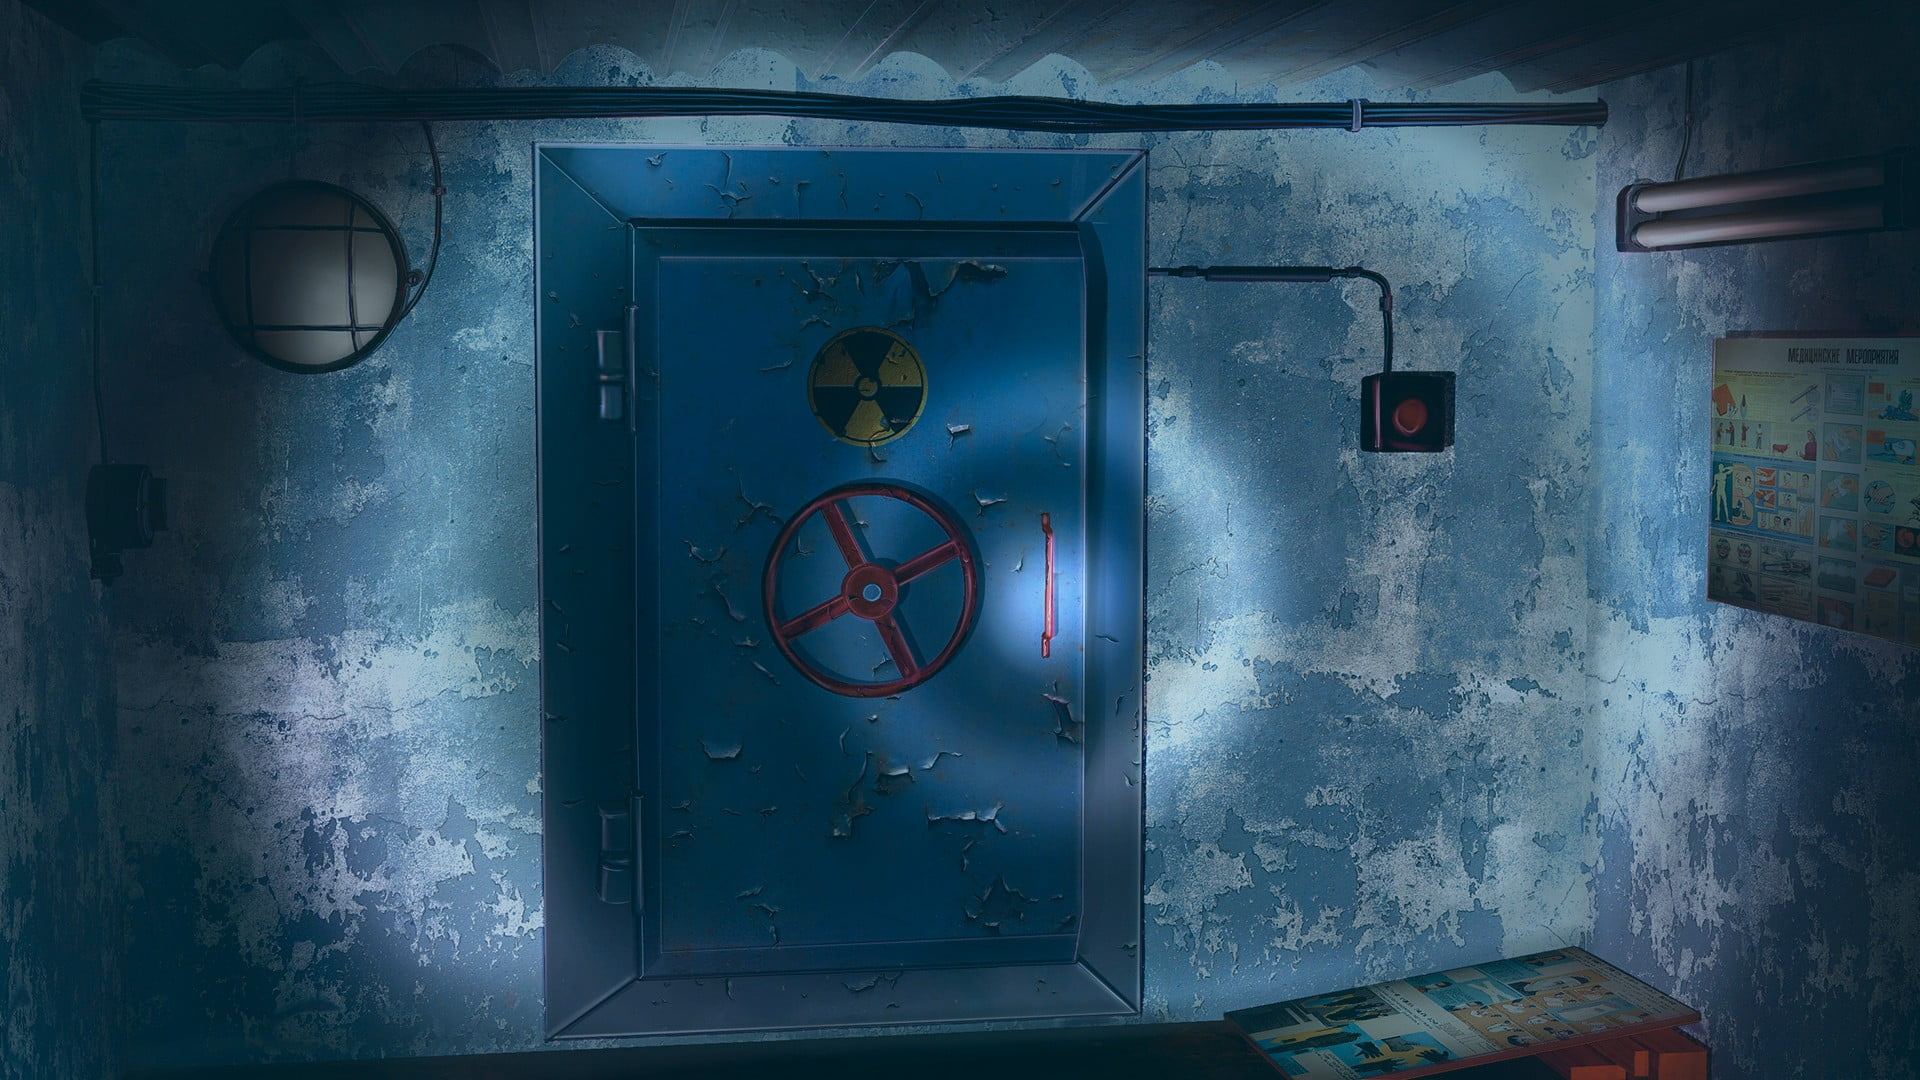 1920x1080 Digital painting of vault door with nuclear signage, radioactive HD wallpaper